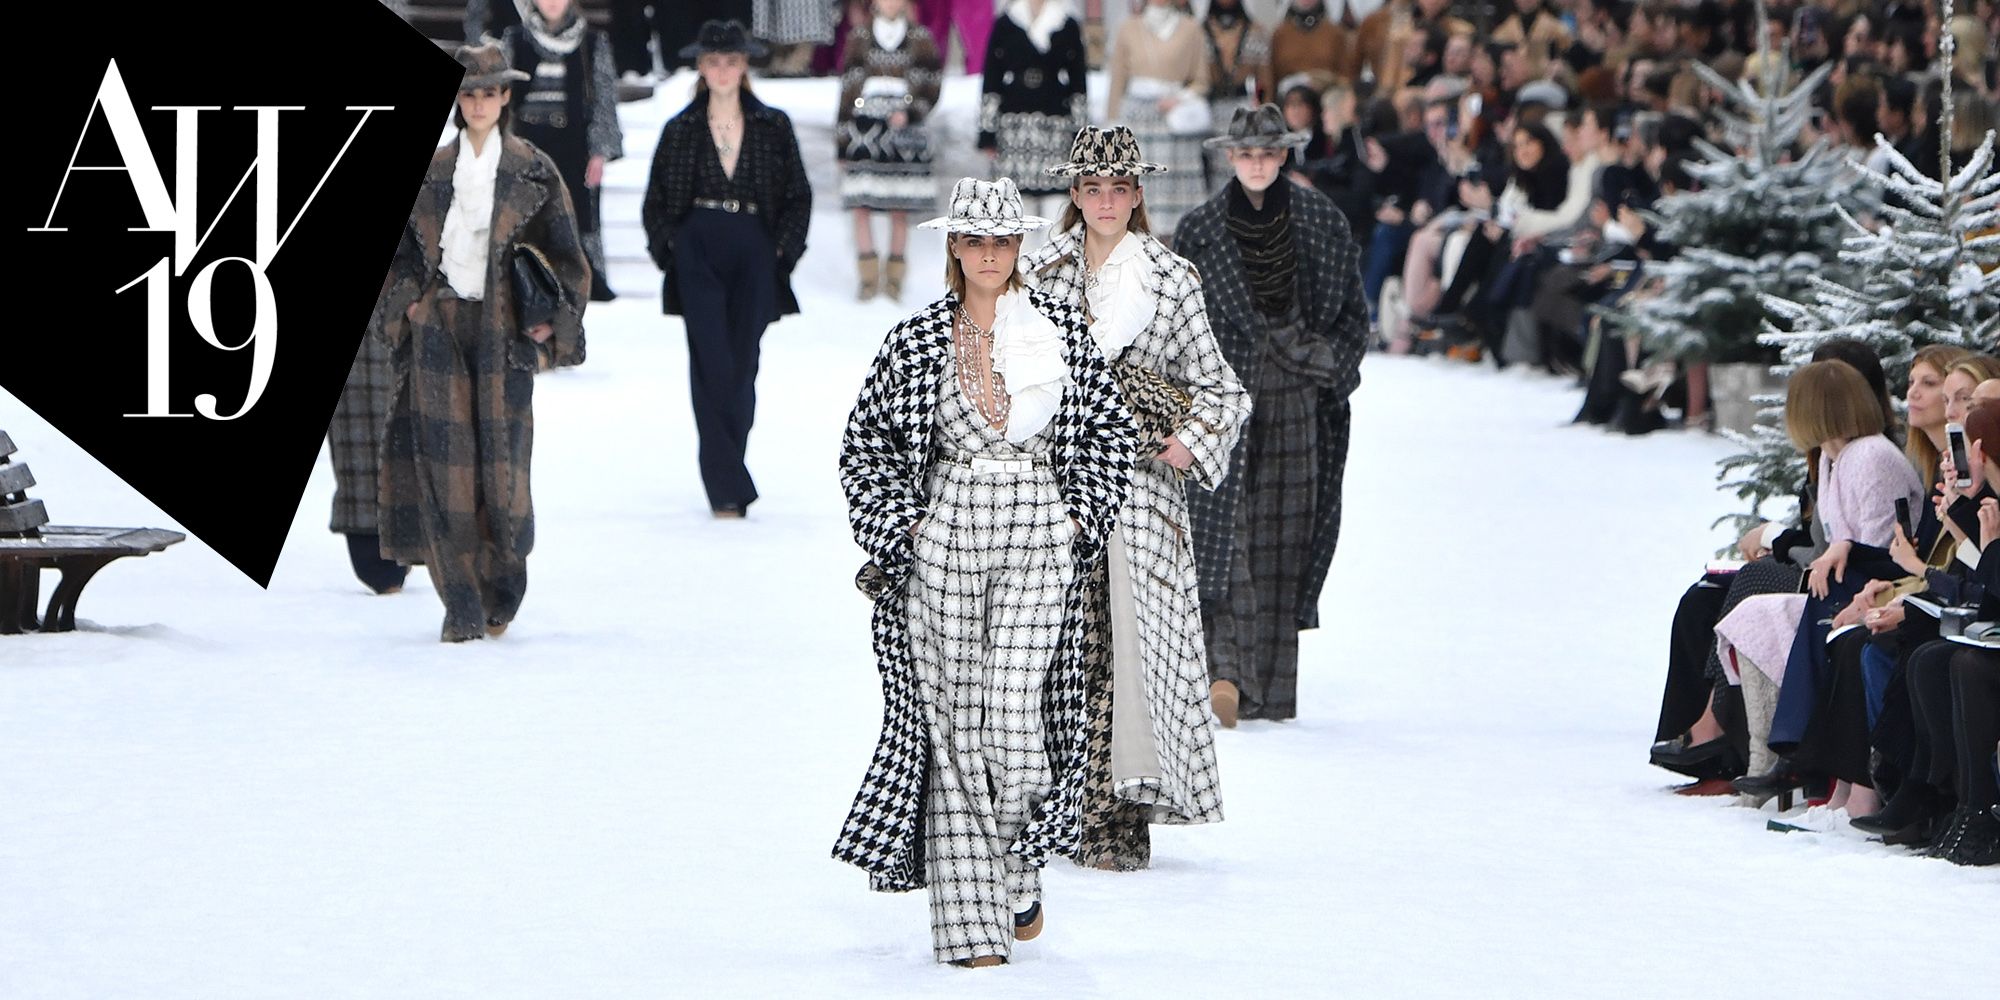 Justine Picardie reviews Karl Lagerfeld's final Chanel show